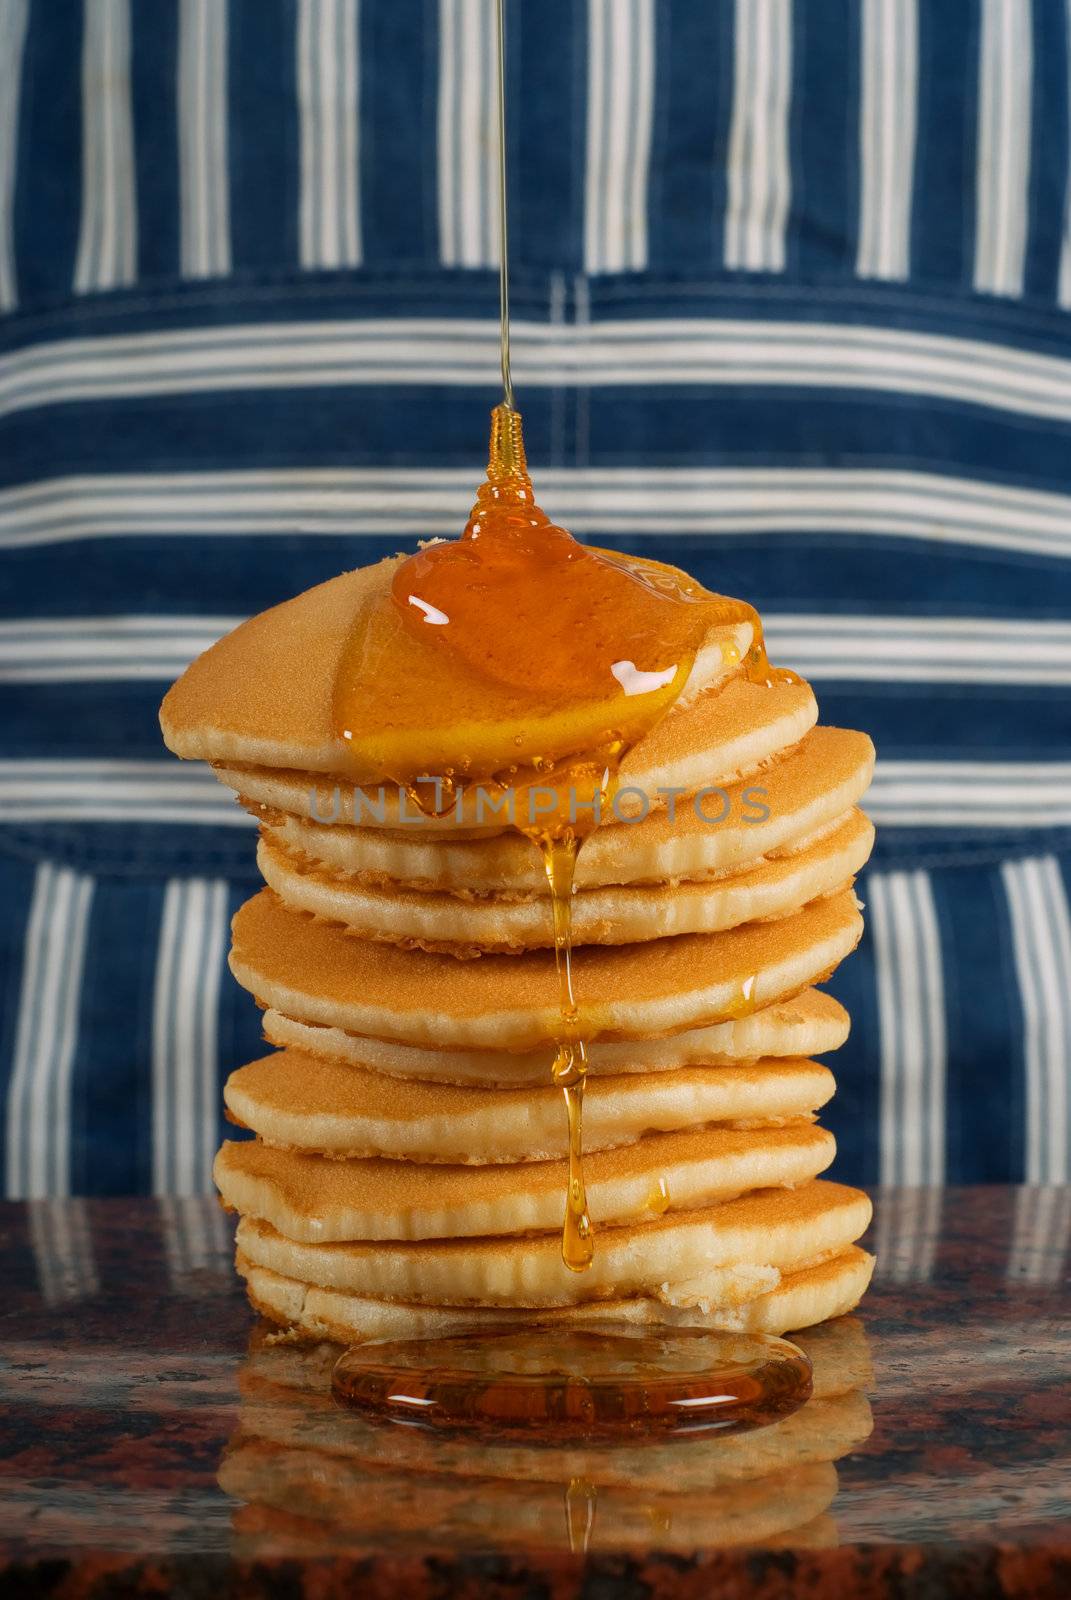 Chef or cook with striped apron pouring syrup on flapjacks or pancakes